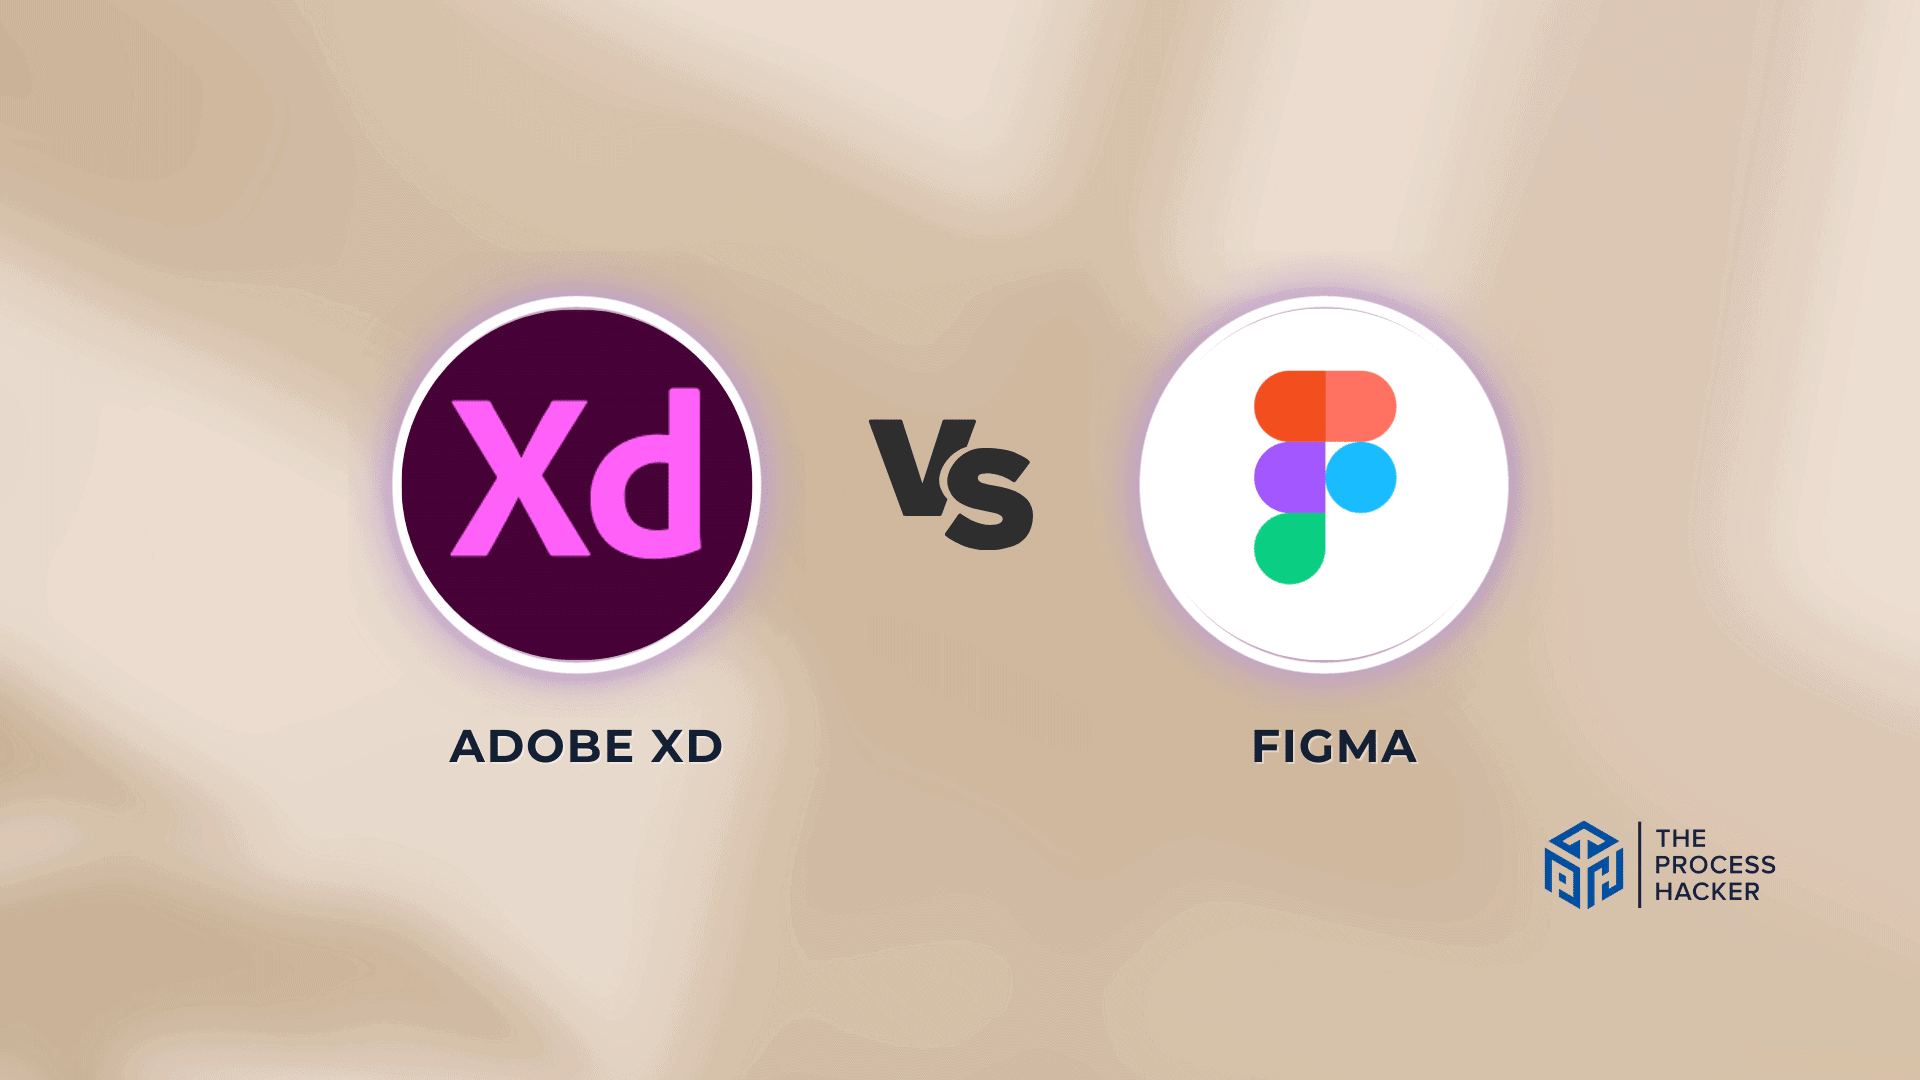 Adobe XD vs Figma Which of these Design Tools is Better? » The Process